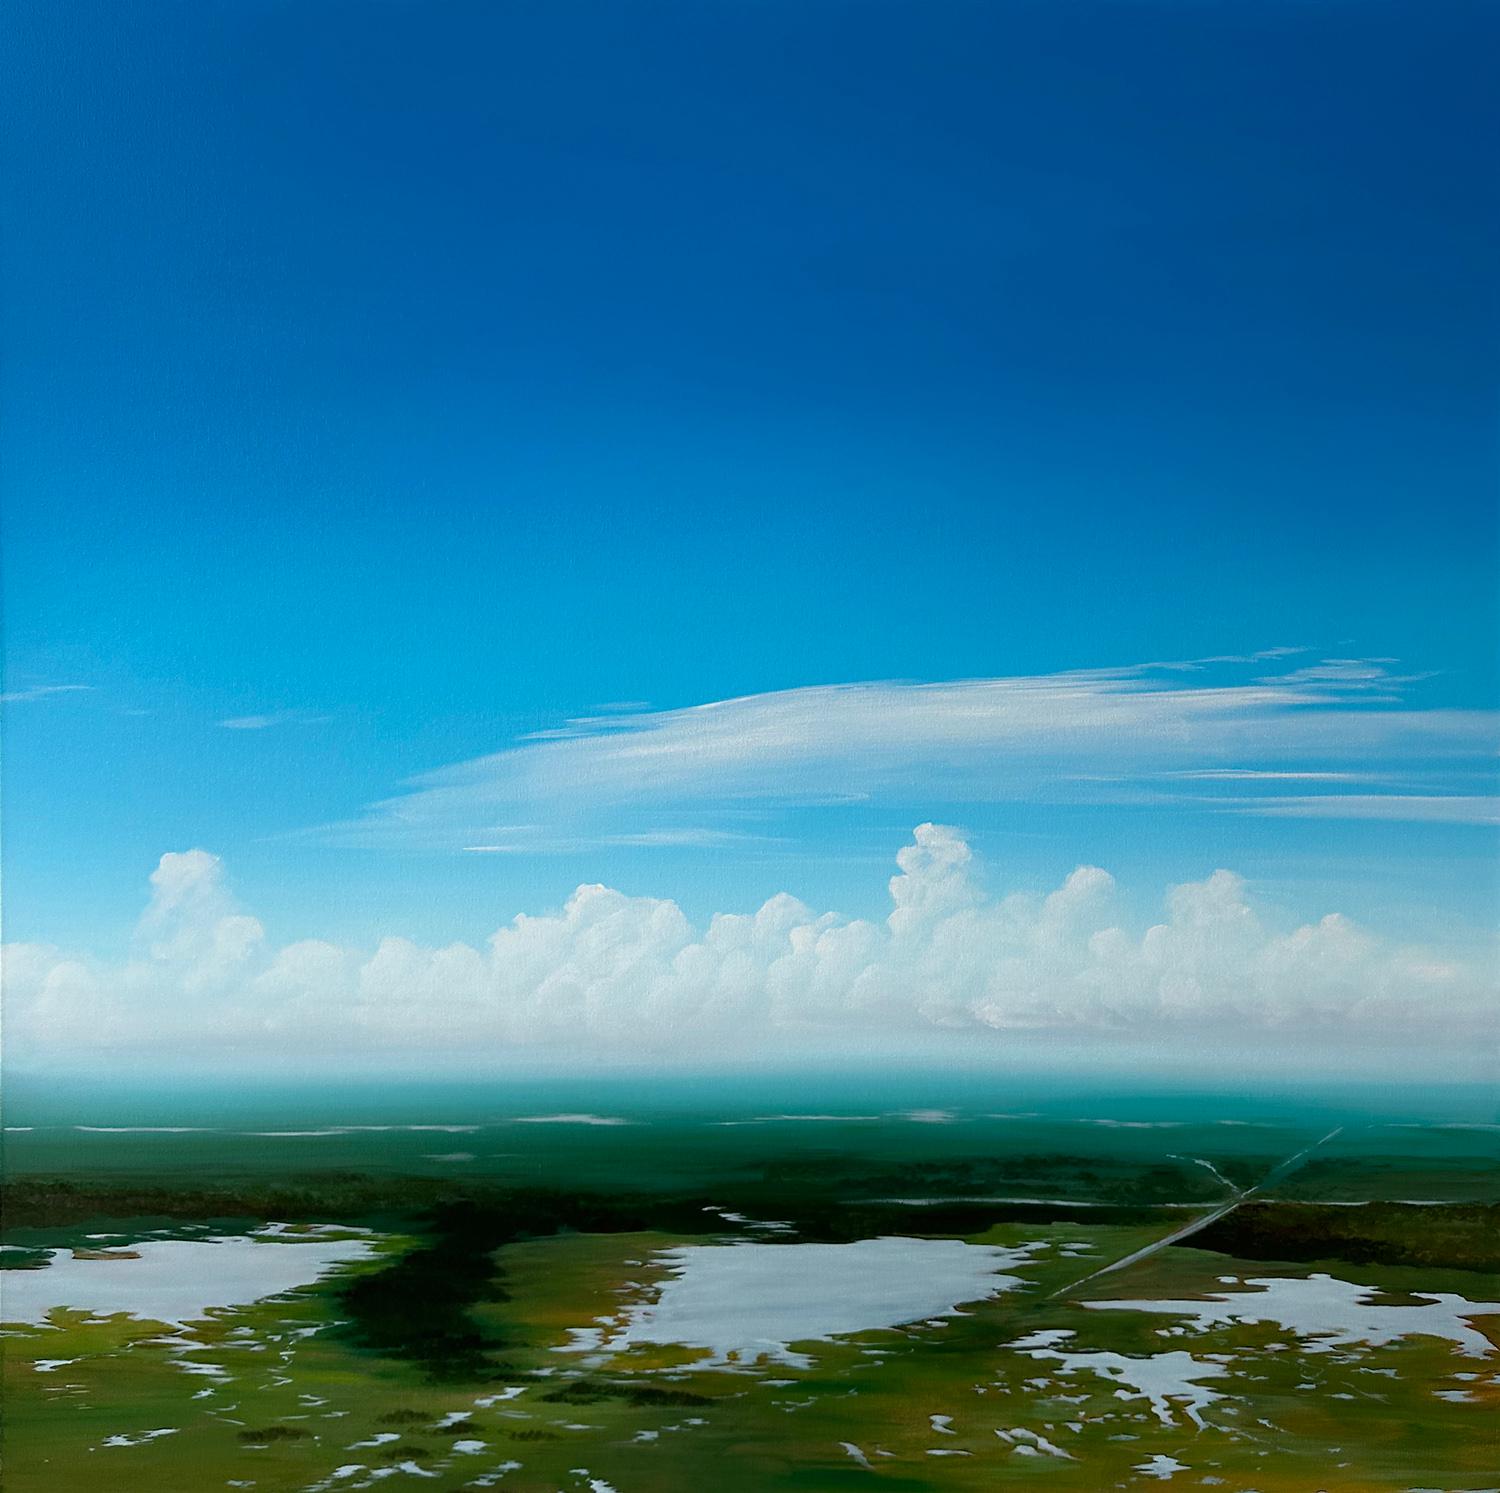 "Louisiana Wetlands", by Kristin Moore, is a part of her 2024 solo exhibition, “Through the Bayou, Into the Garden”, at Ferrara Showman Gallery. Marking a transition from her previous work, "Louisiana Wetlands" shows Kristin Moore directing her eye